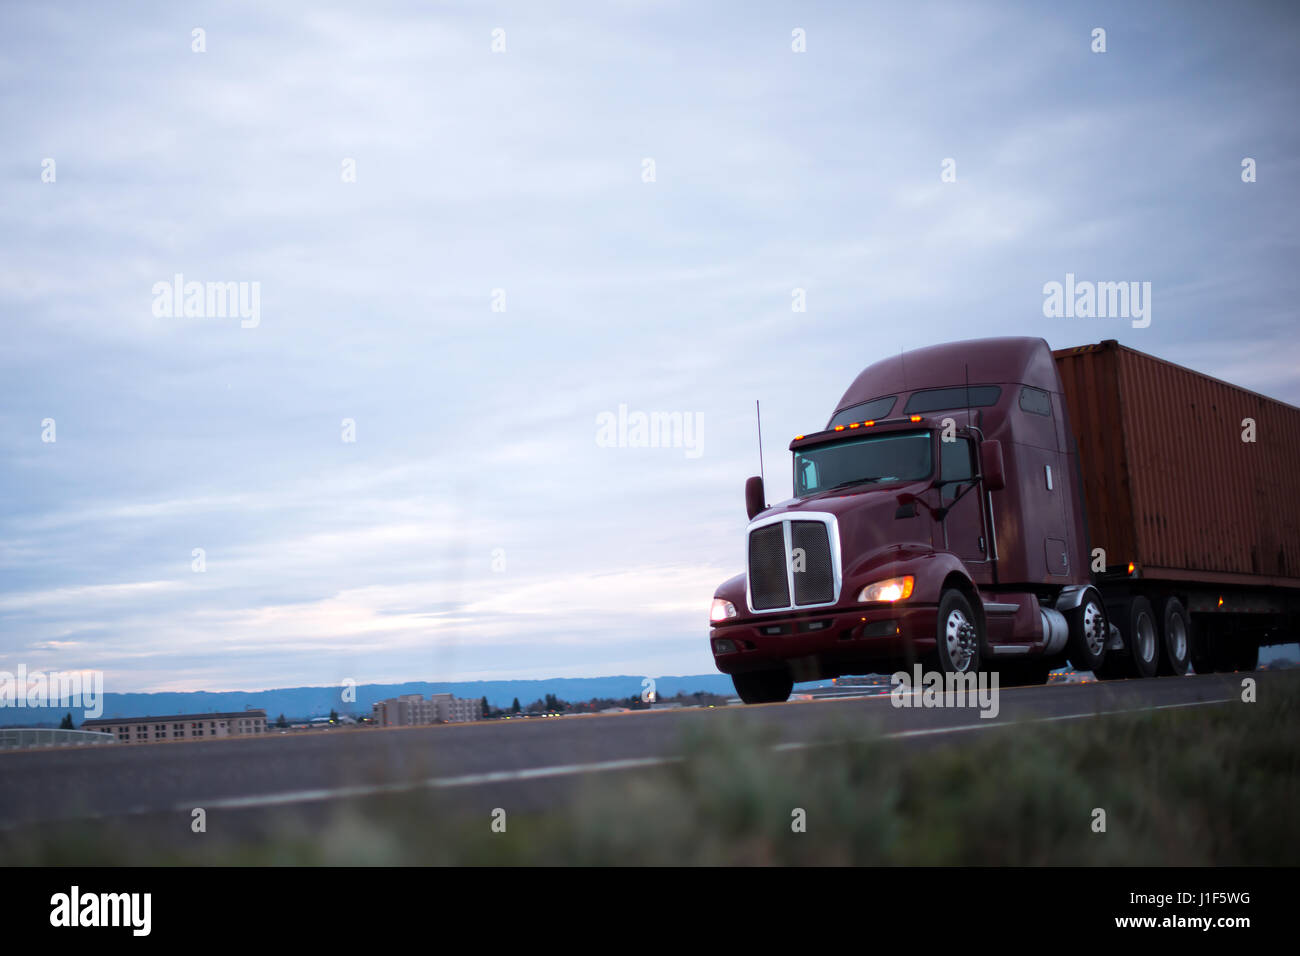 Maroon classic big rig semi truck with headlights transports container on the road running along the industrial and commercial buildings in evening Stock Photo